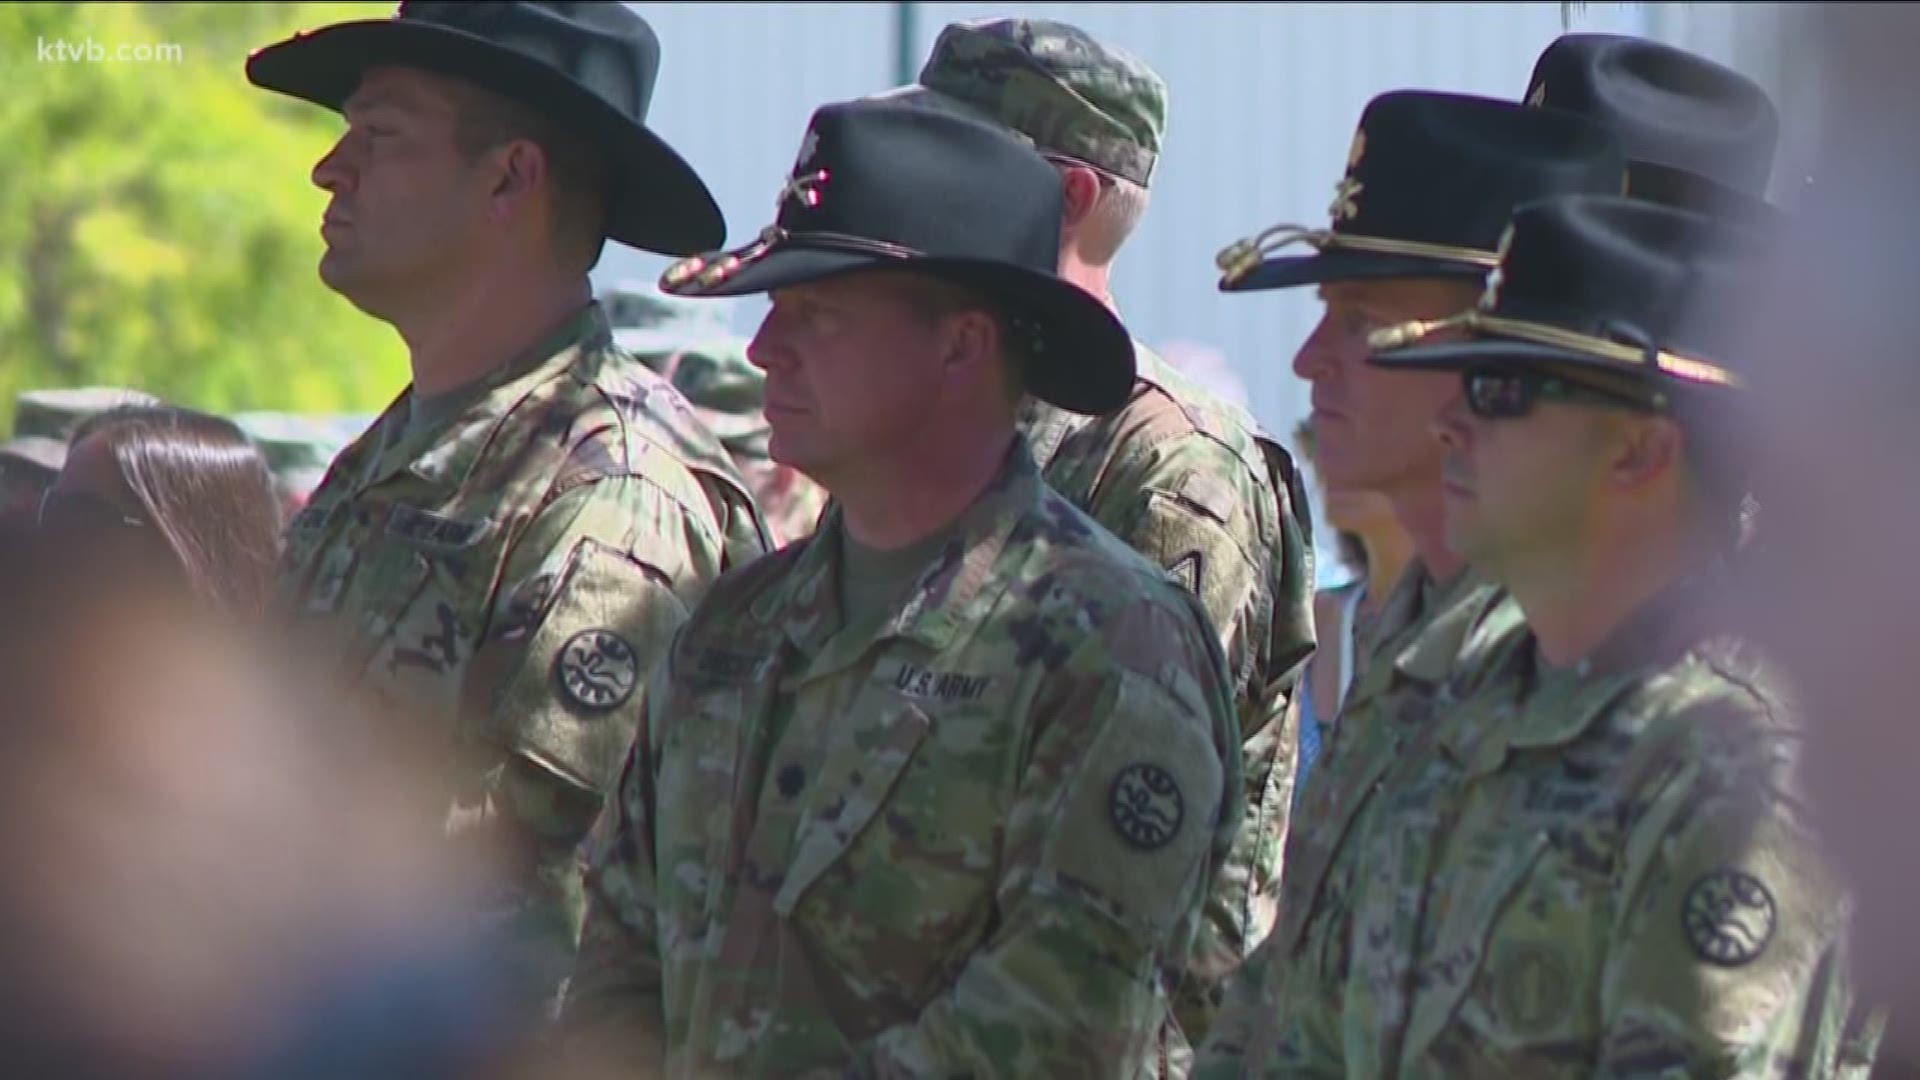 The Idaho National Guard held a ceremony today to honor those who served and paid the ultimate sacrifice.